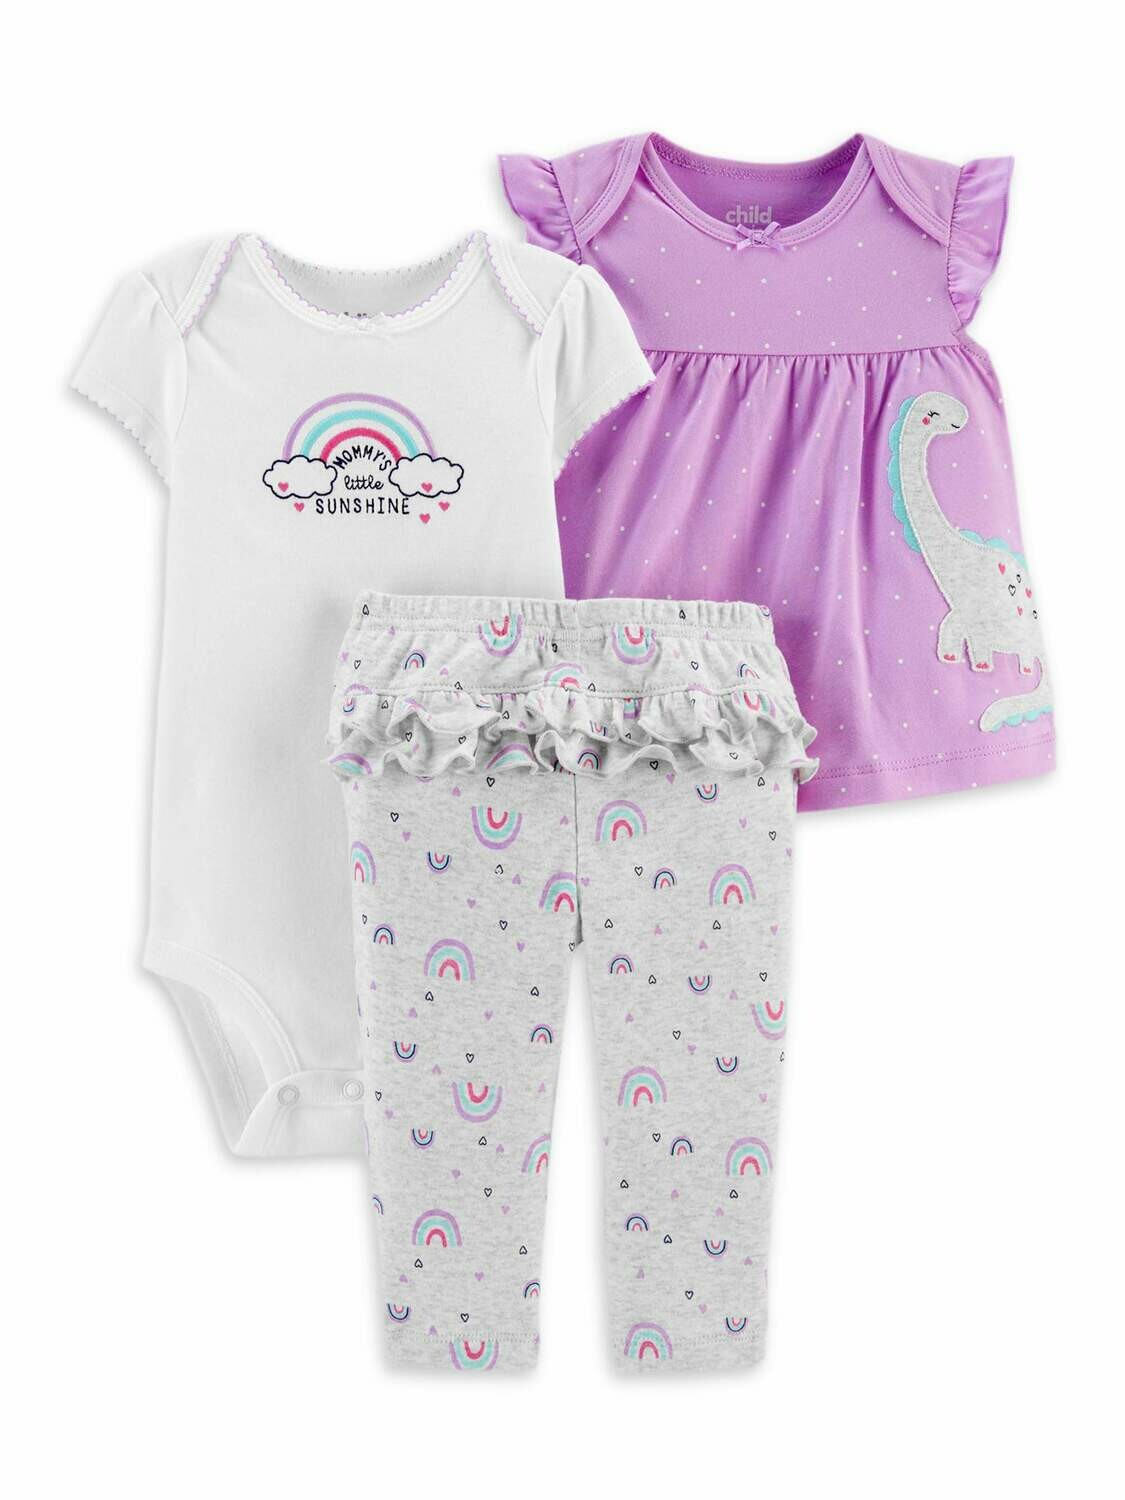 PC Baby Girls Outfit Set